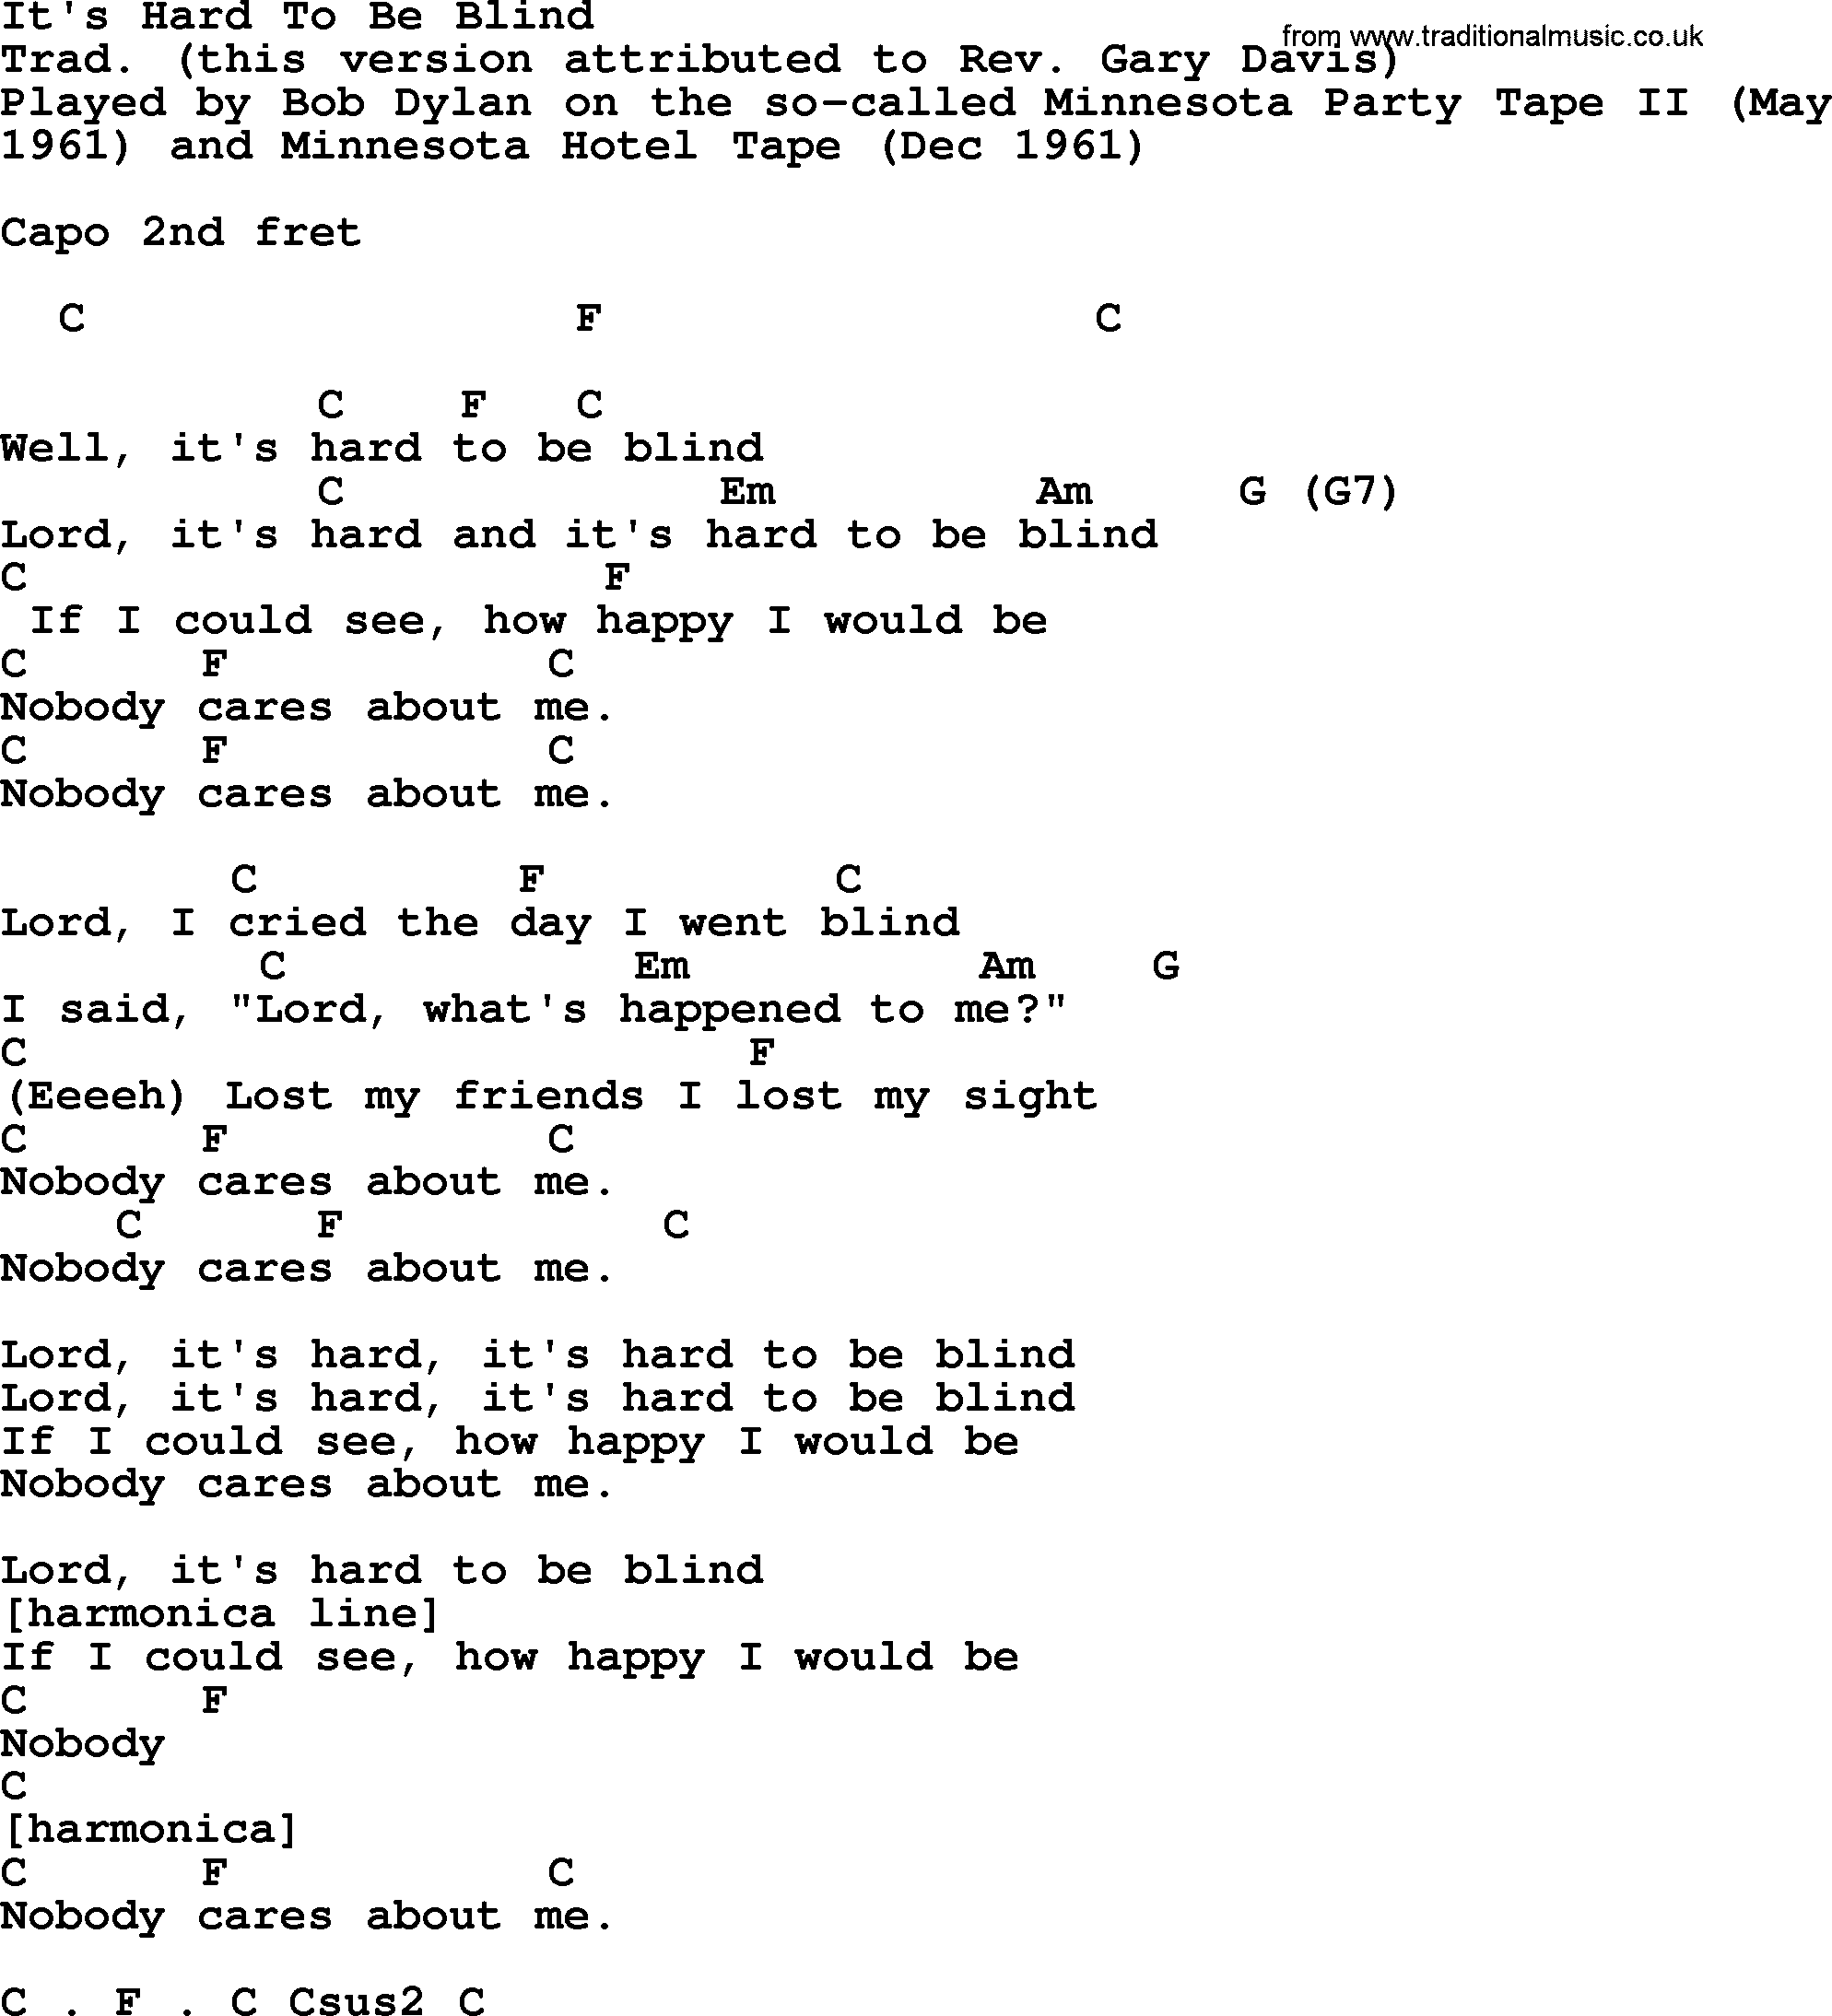 Bob Dylan song, lyrics with chords - It's Hard To Be Blind